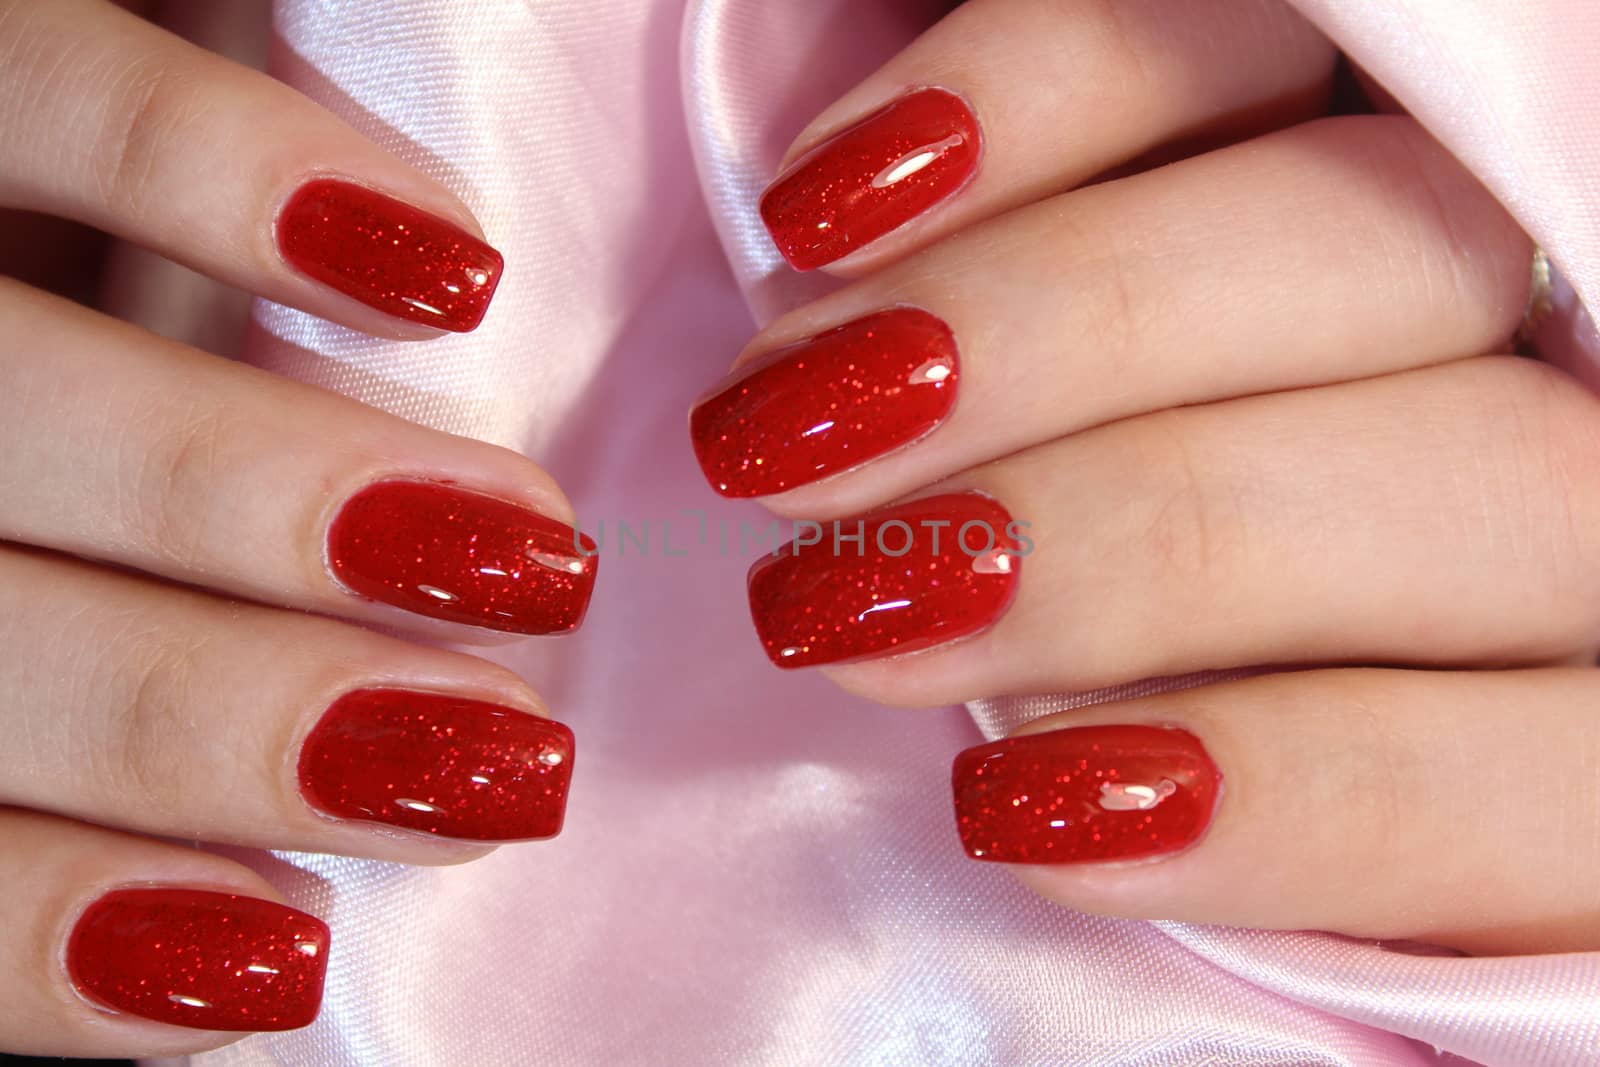 Hands of a woman with red manicure by SmirMaxStock